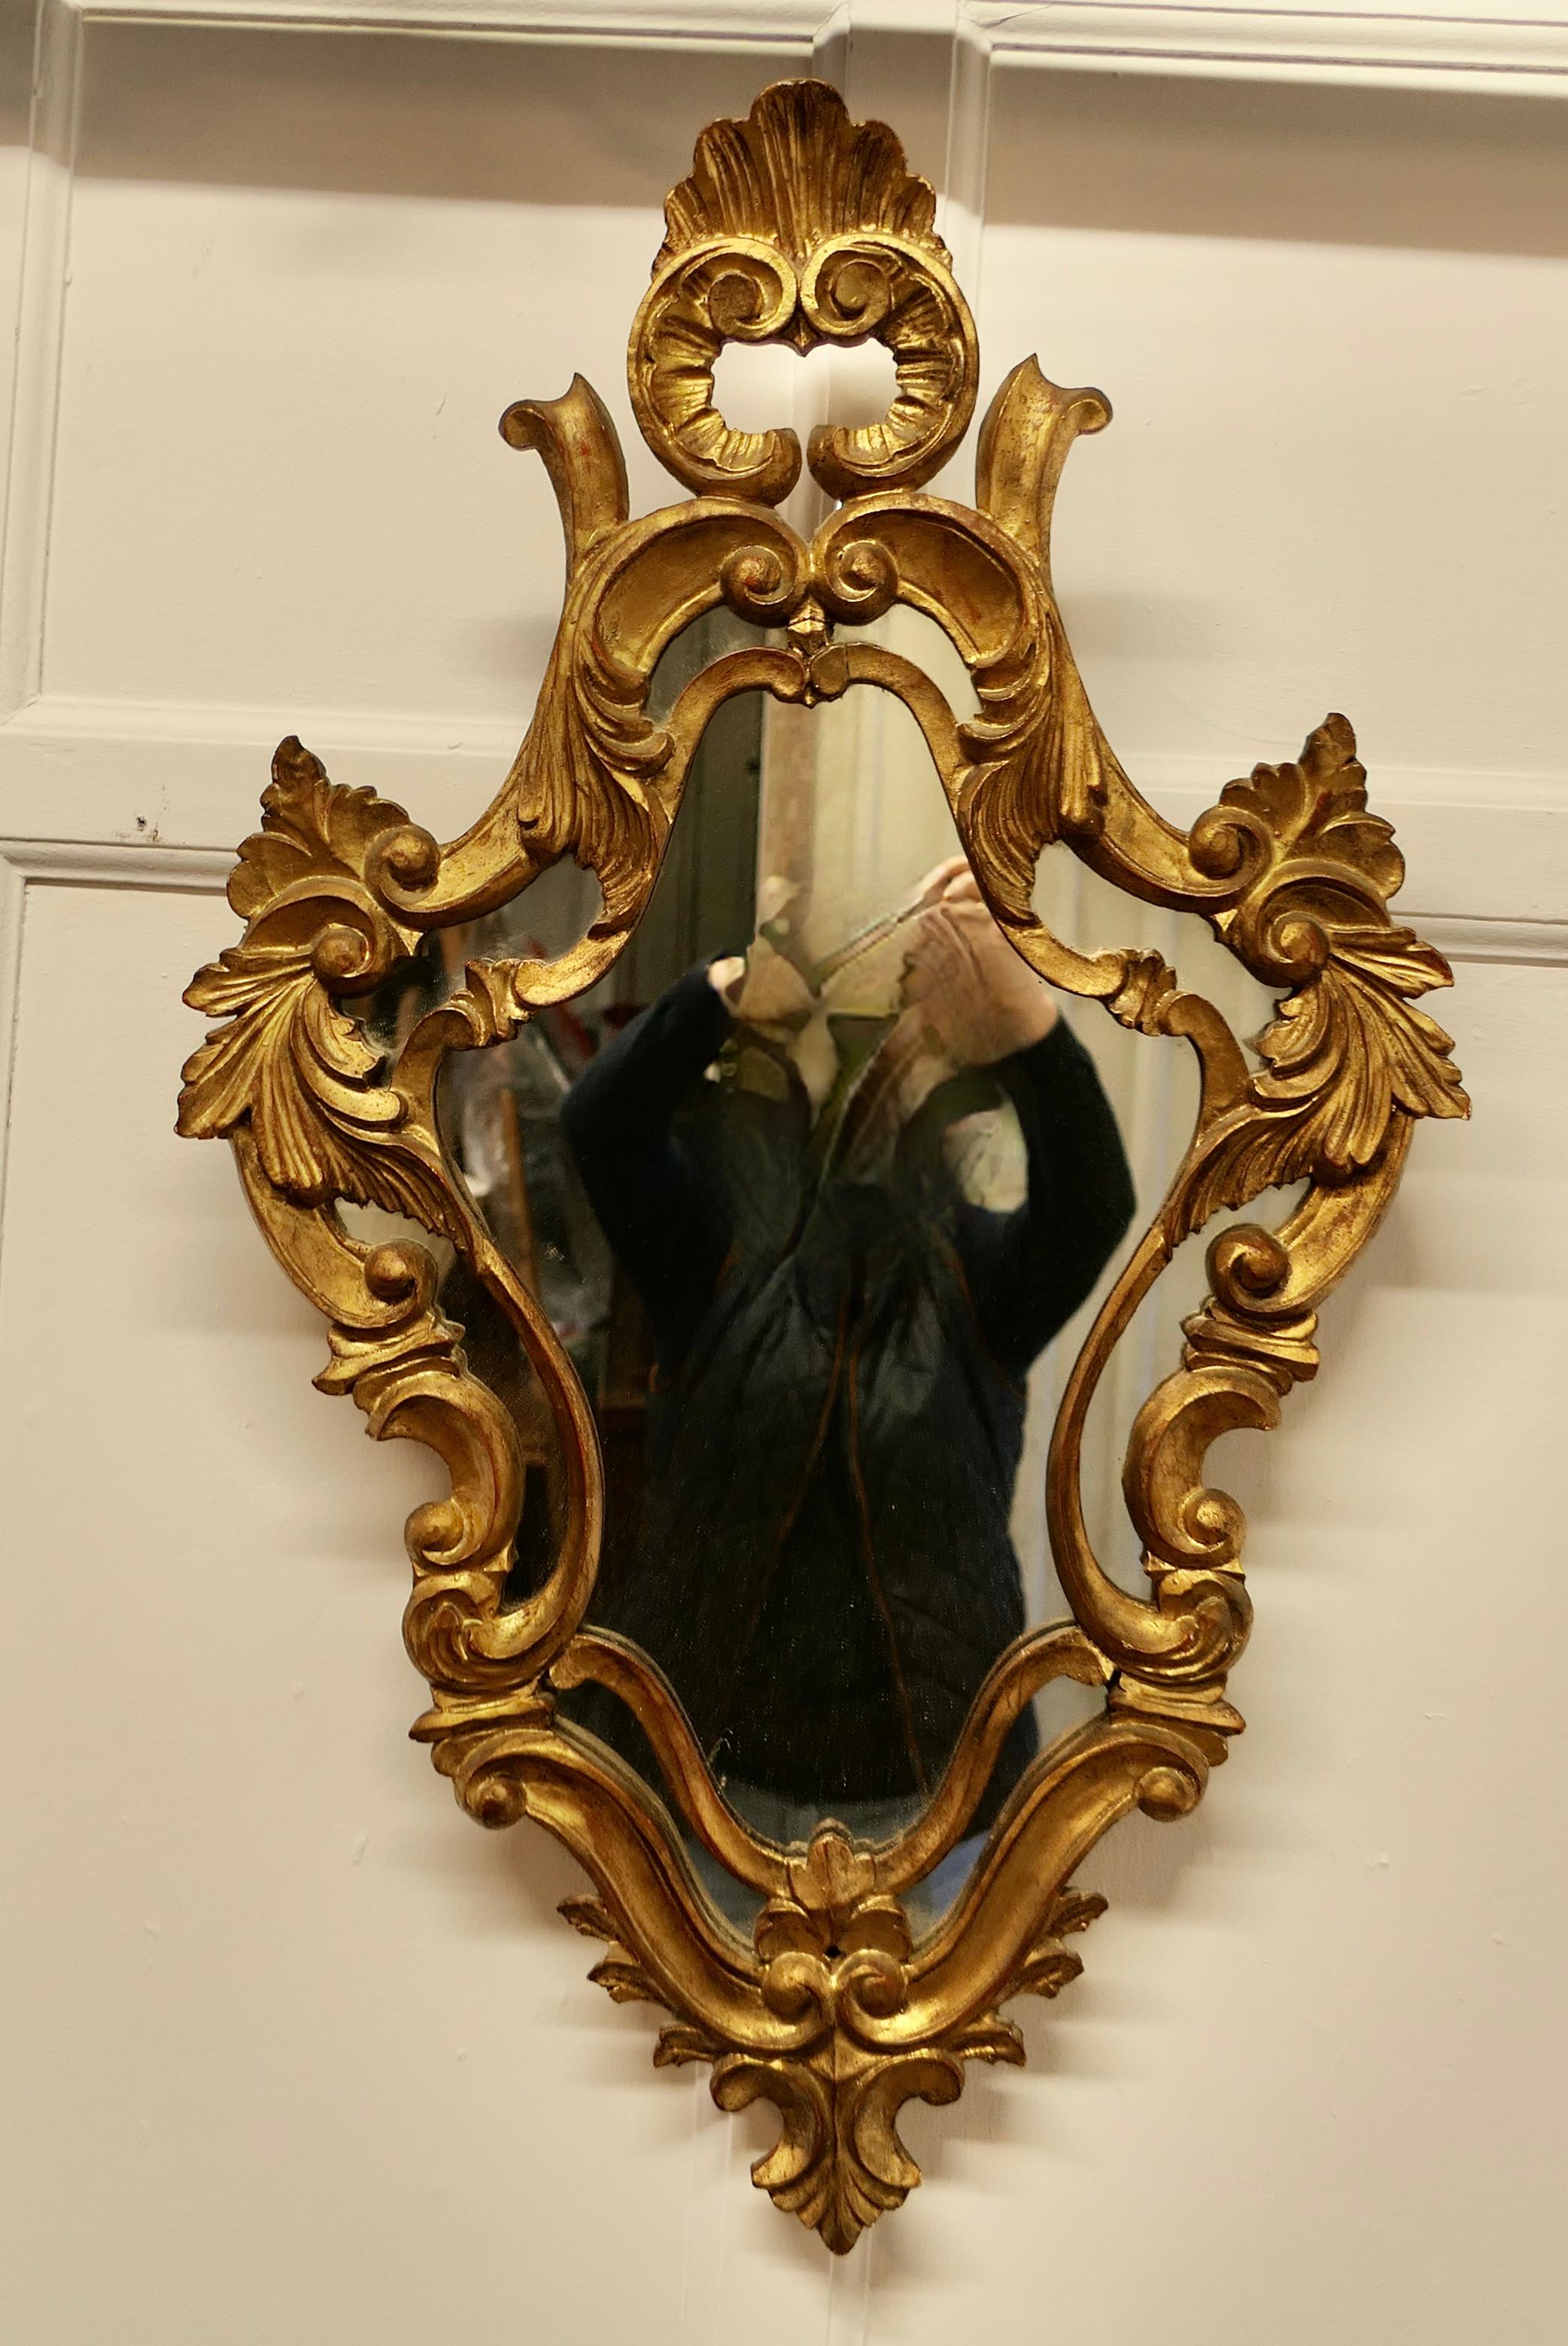 Superb Rococo Style Gilt Wall Mirror

The Mirror has an elaborate 4” wide gilt Frame inset with mirrors in the French Rococo Style, there are abundant Shells and Acanthus leaves all around the frame
A Wonderfull addition to any room and in good